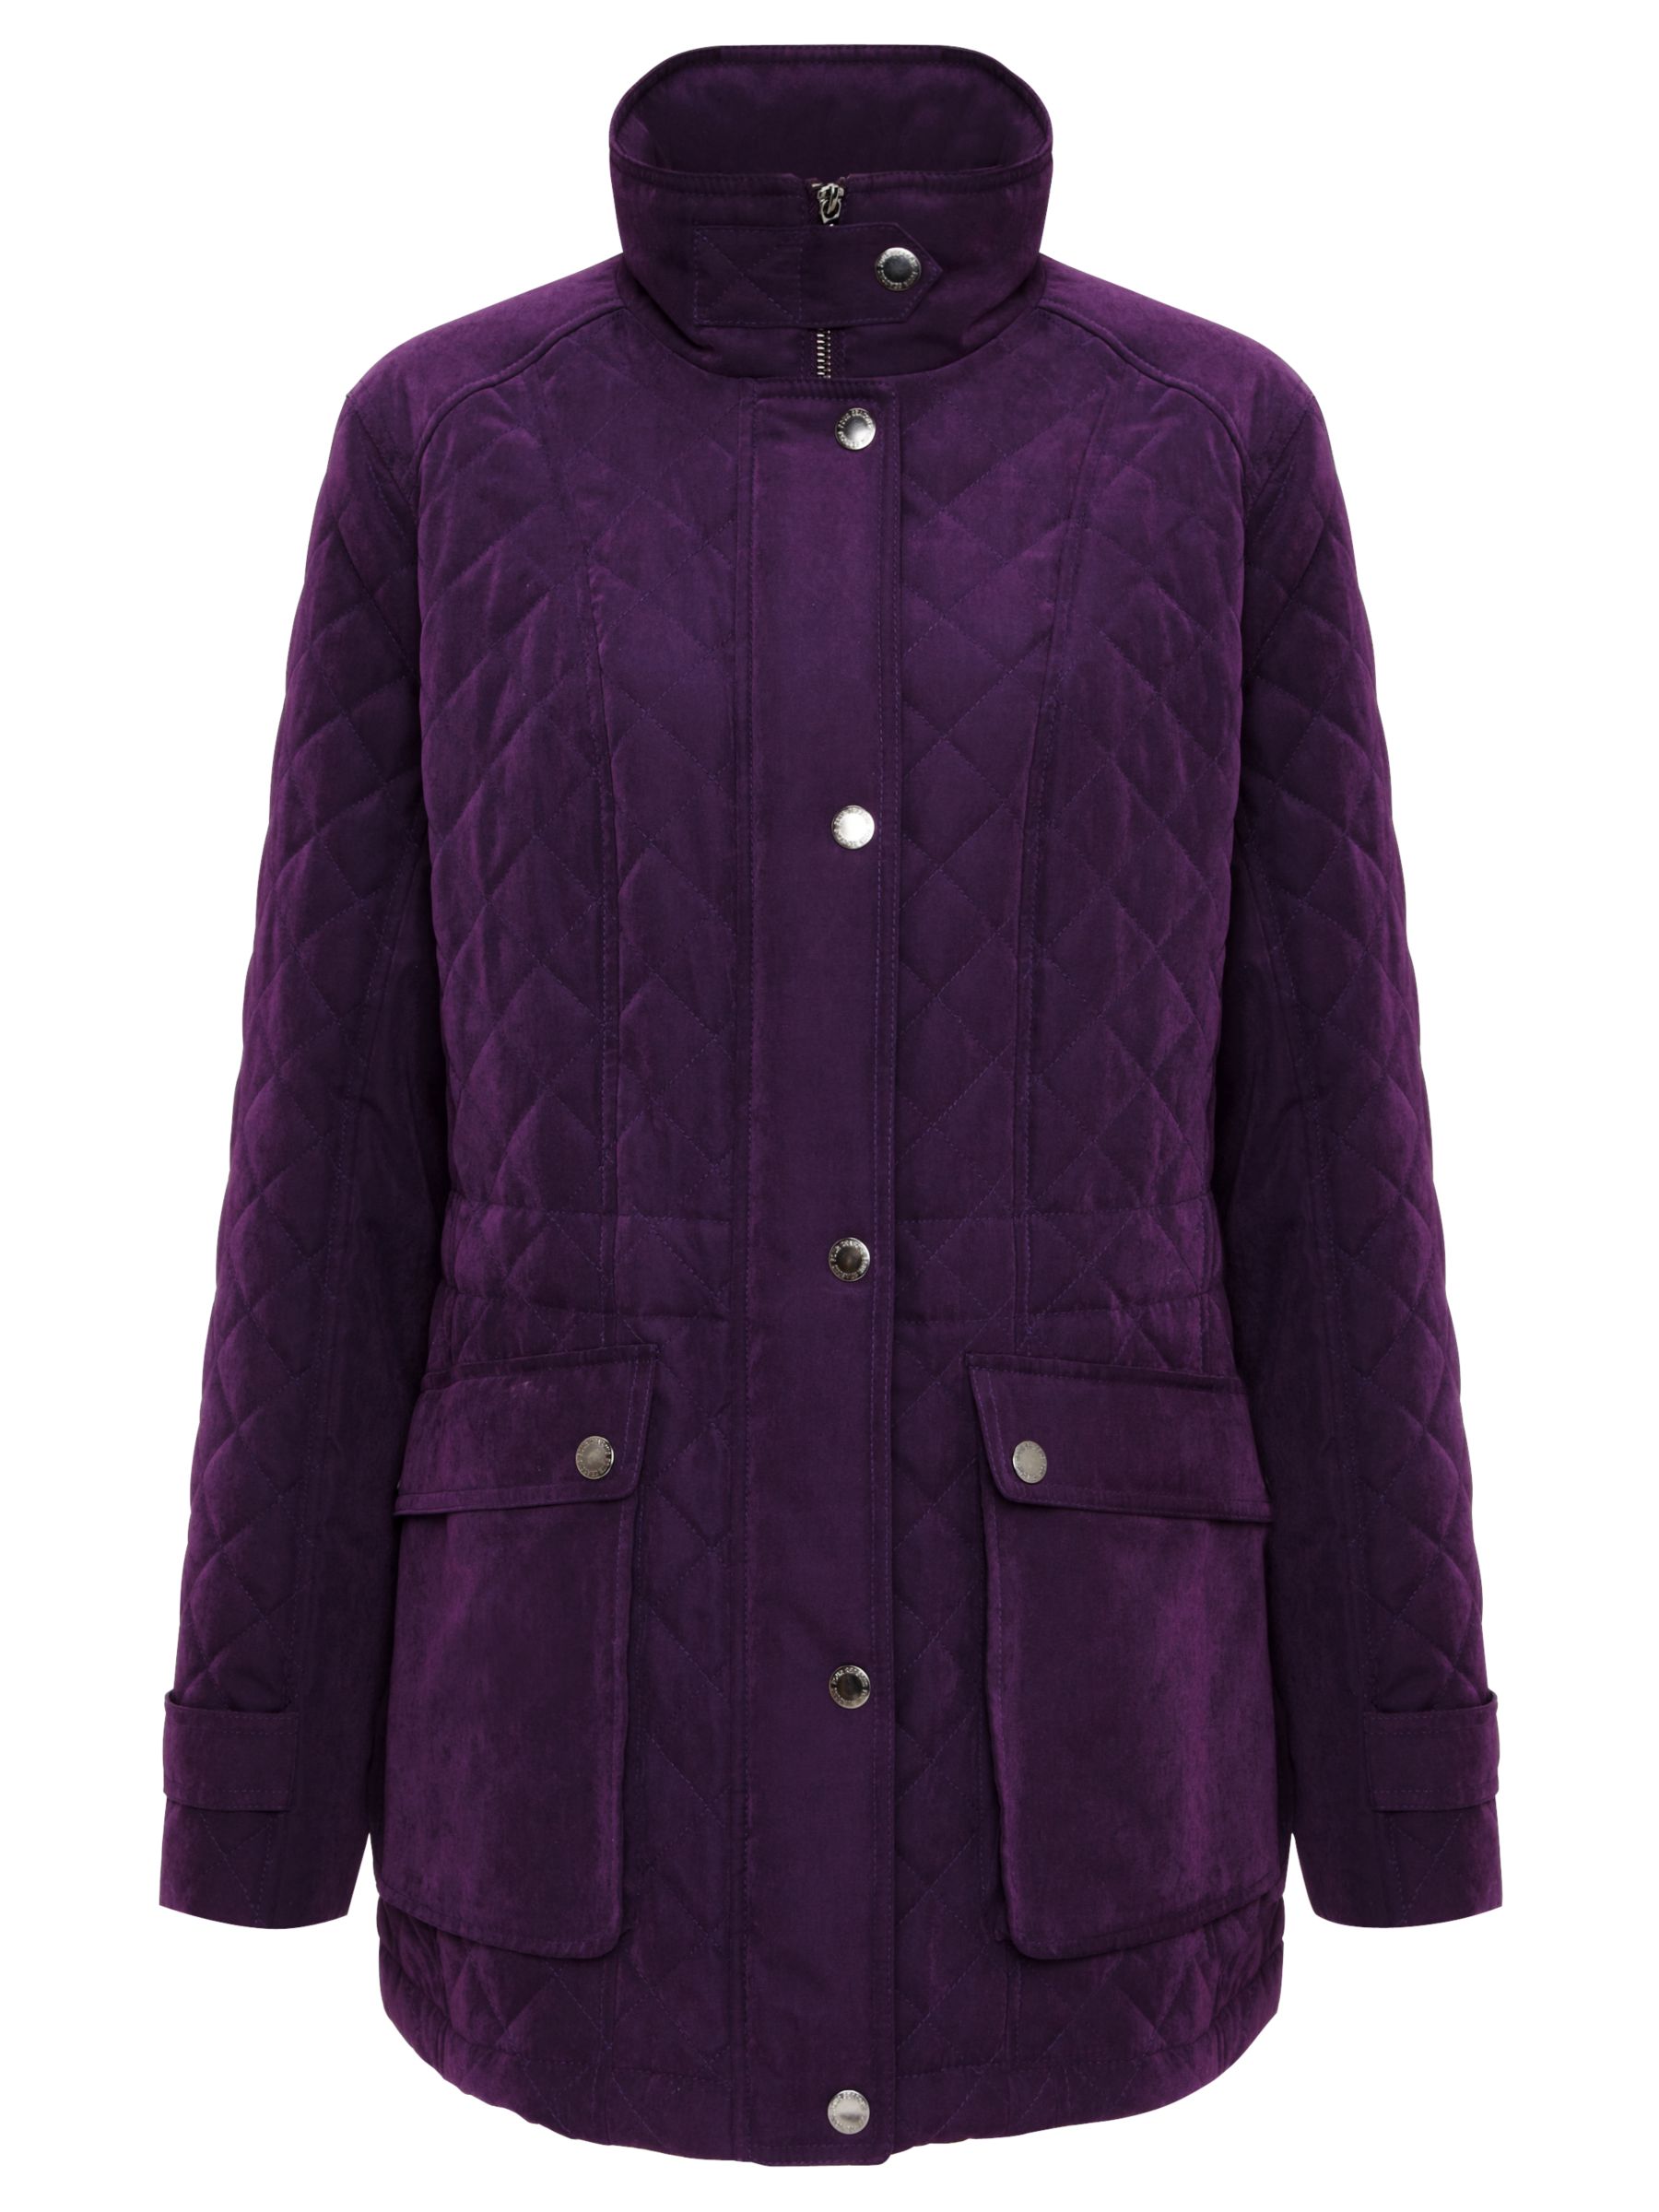 Quilted | Women's Coats & Jackets | John Lewis